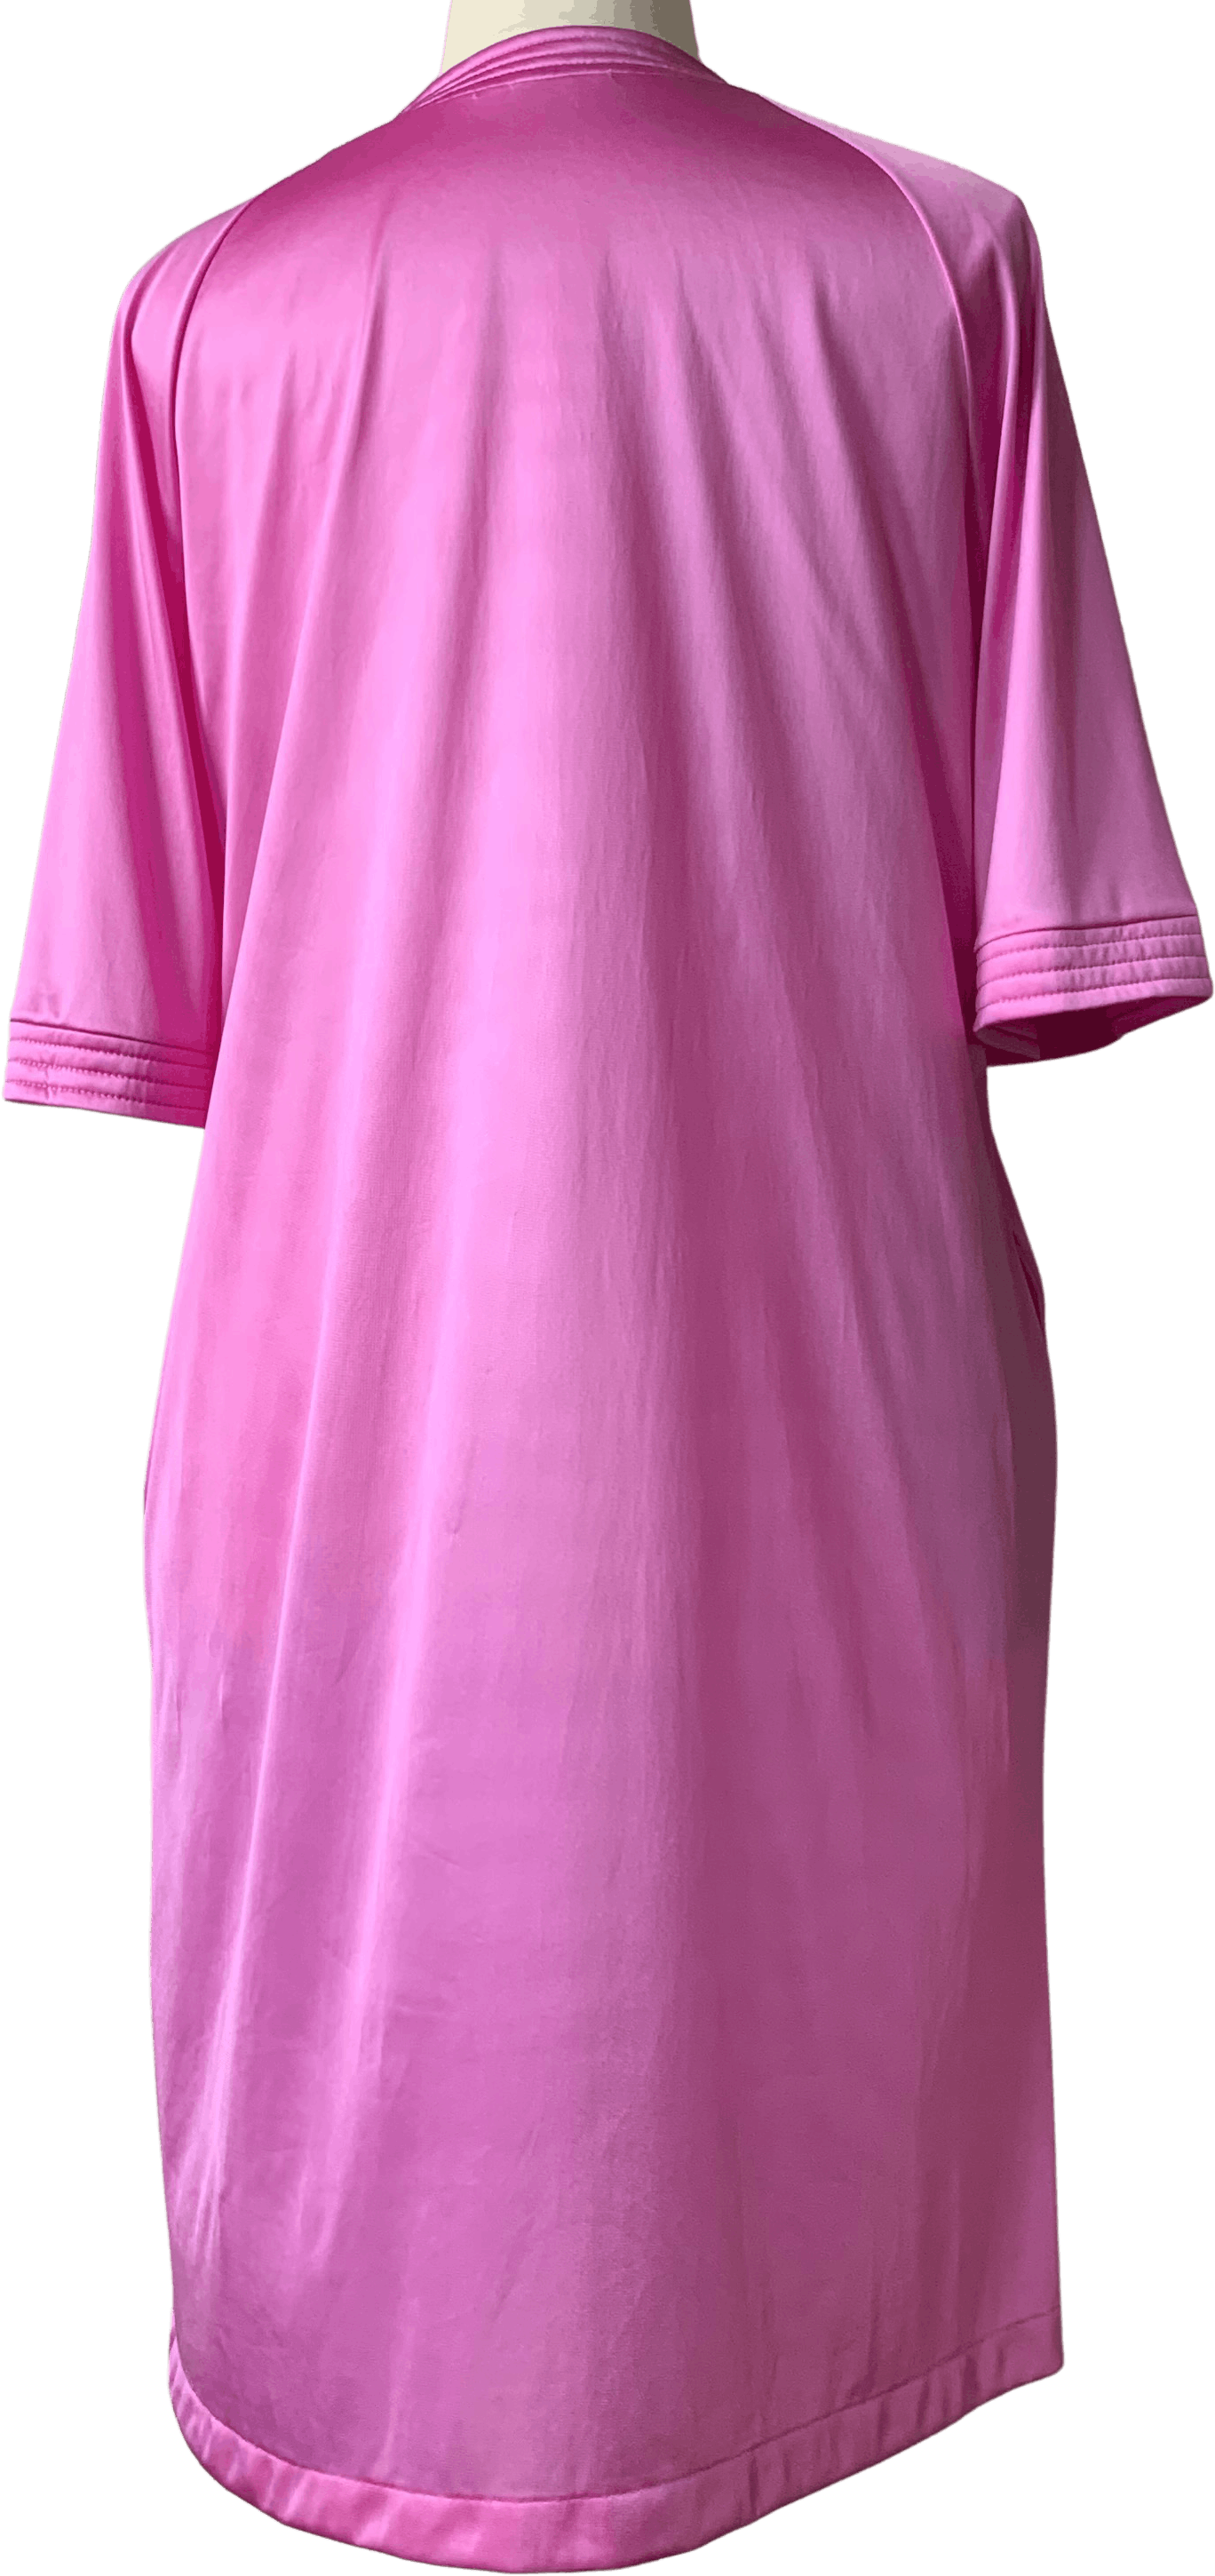 Vintage 70's Bubble Gum Pink Dress Robe by Vanity Fair | Shop THRILLING